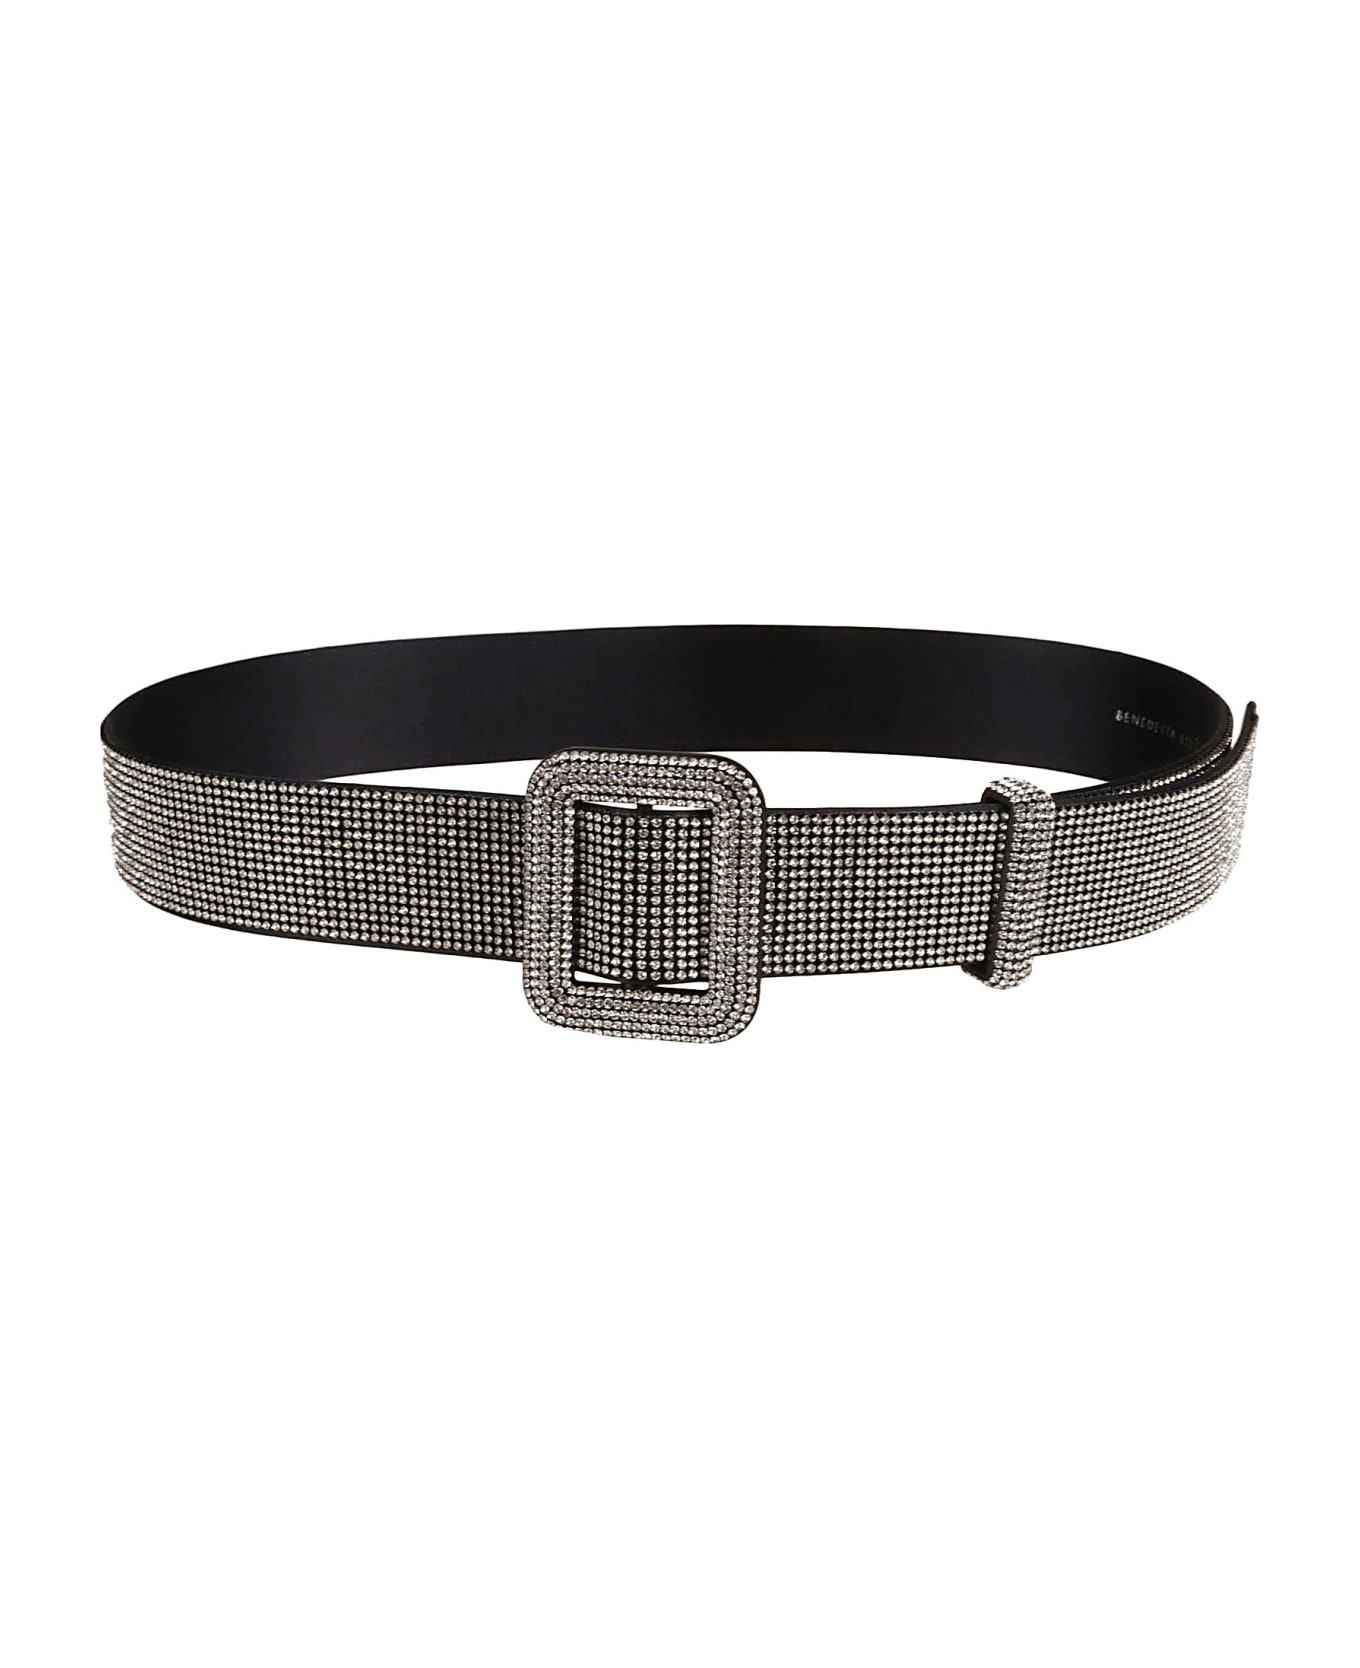 Benedetta Bruzziches Crystal Embellished Belt - The World Is Not E